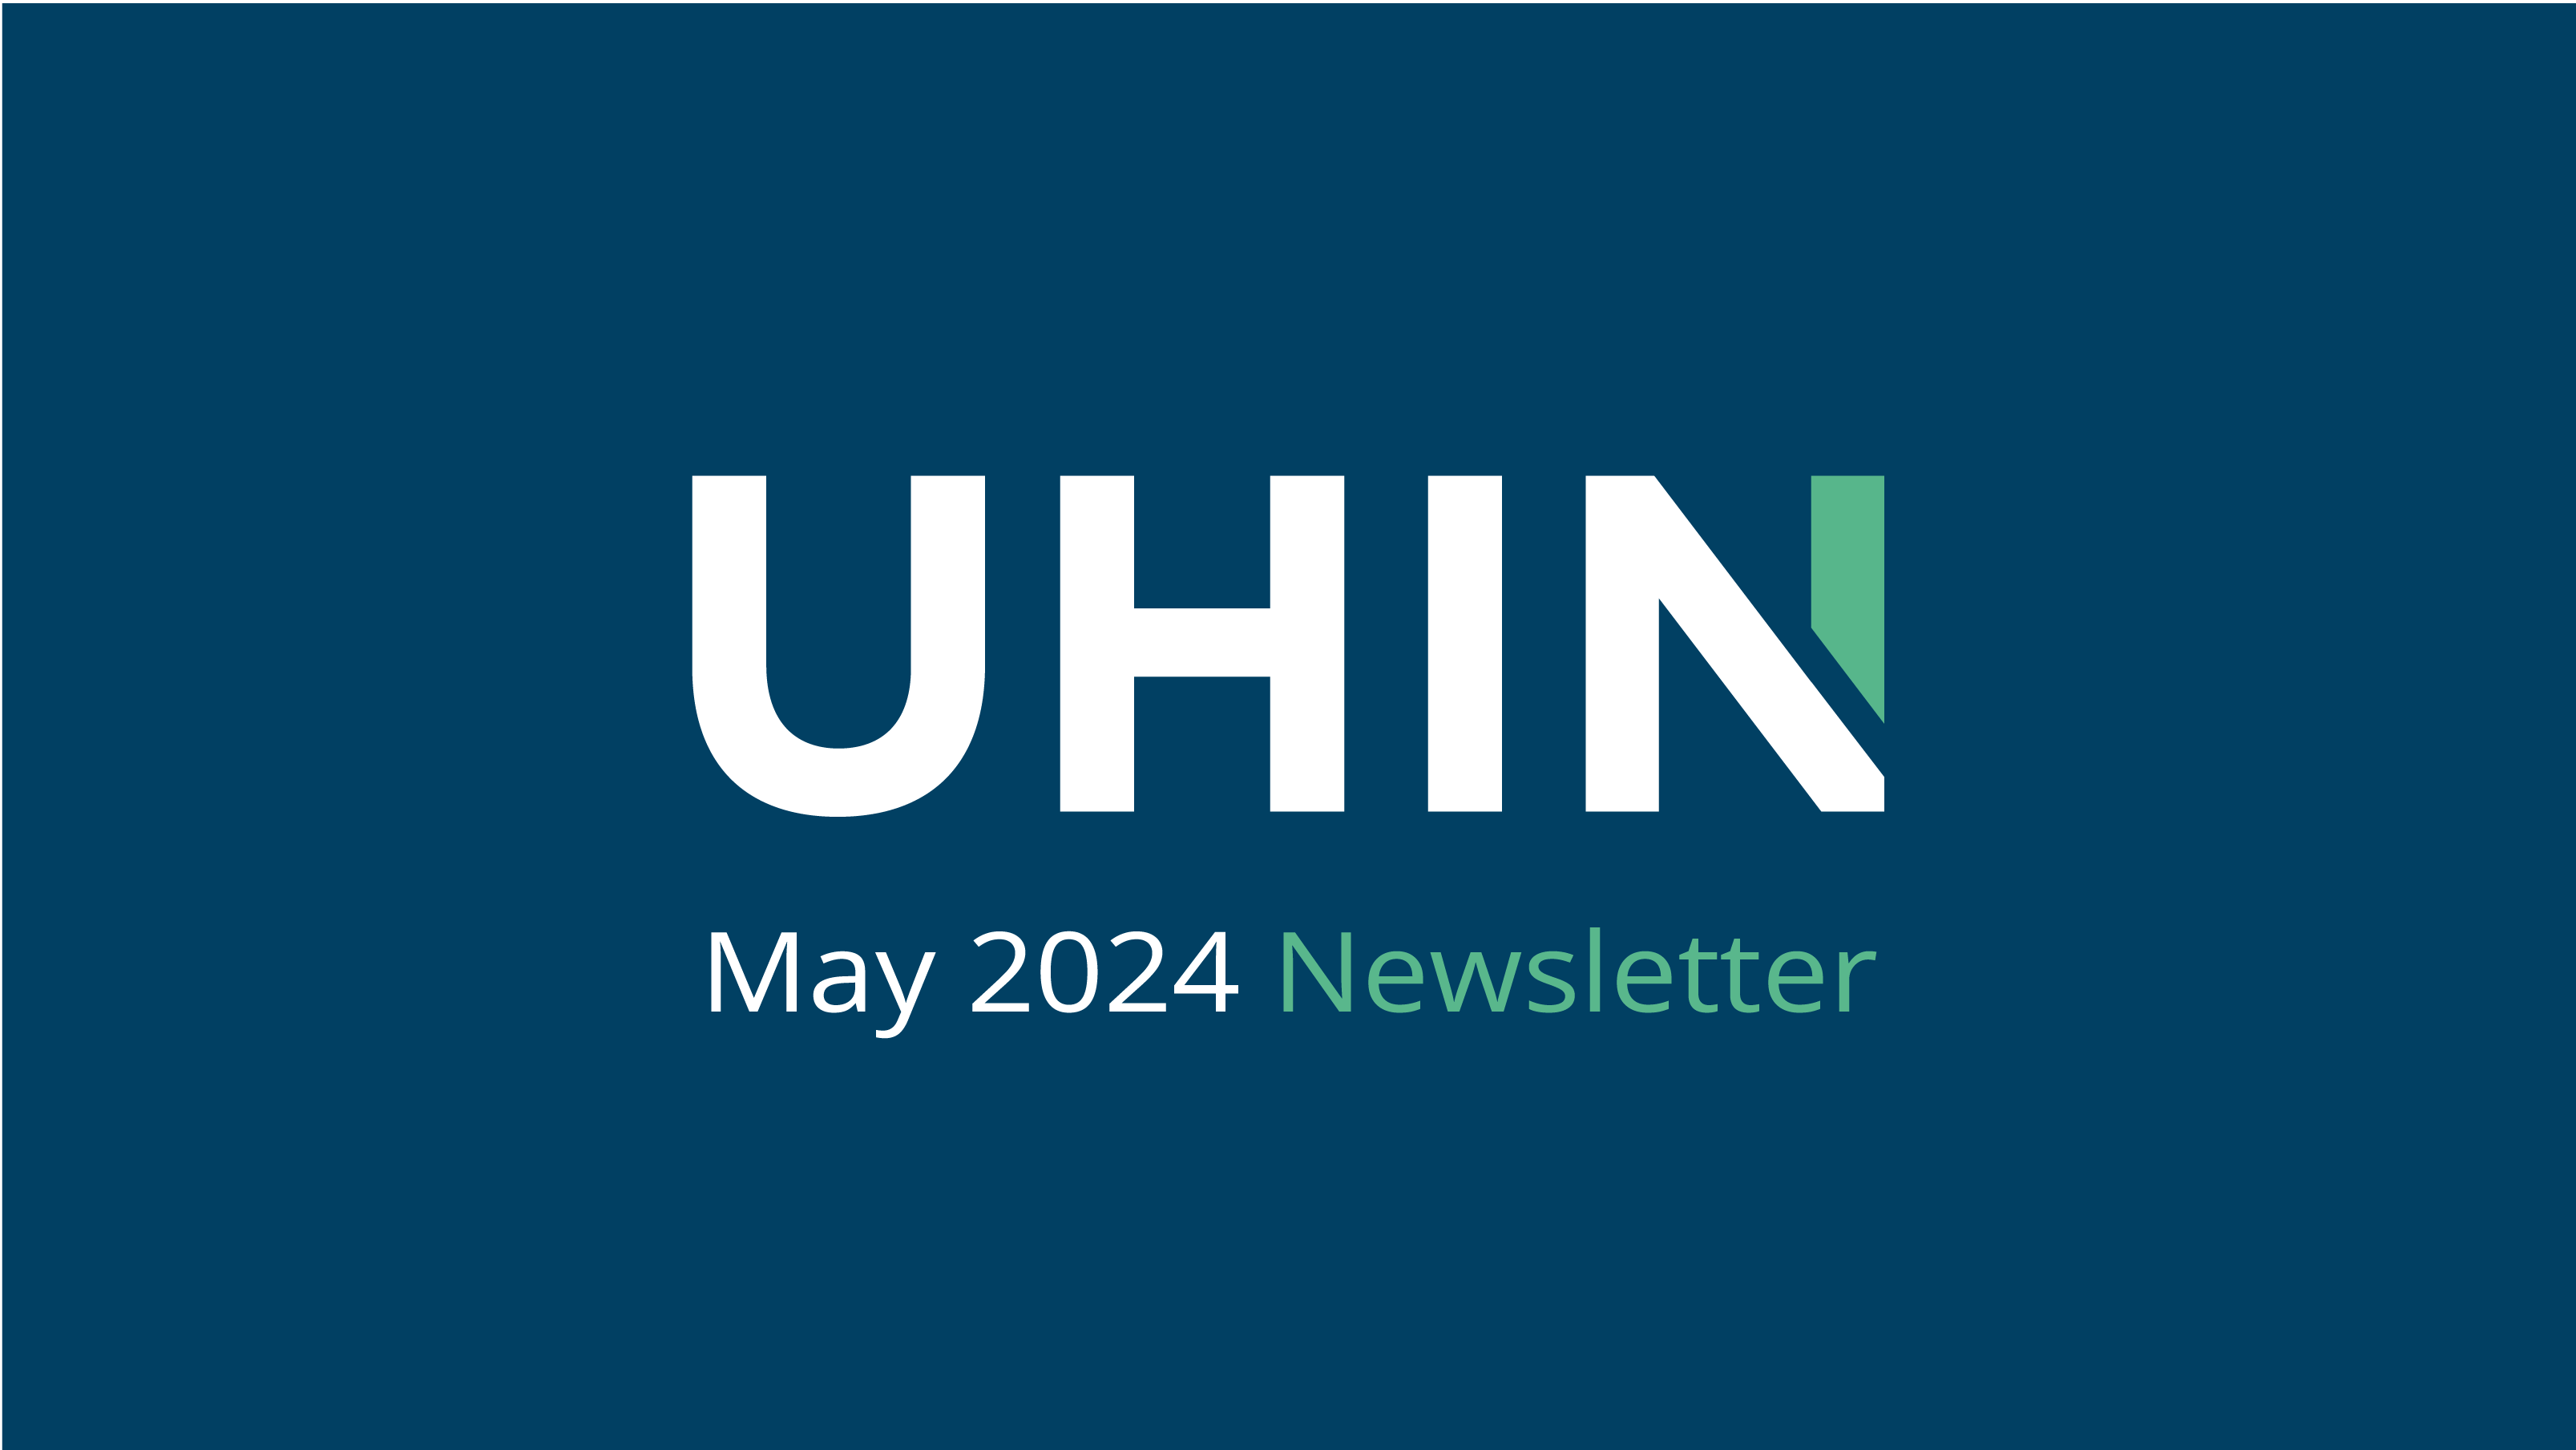 Newsletter: May 2024 Issue